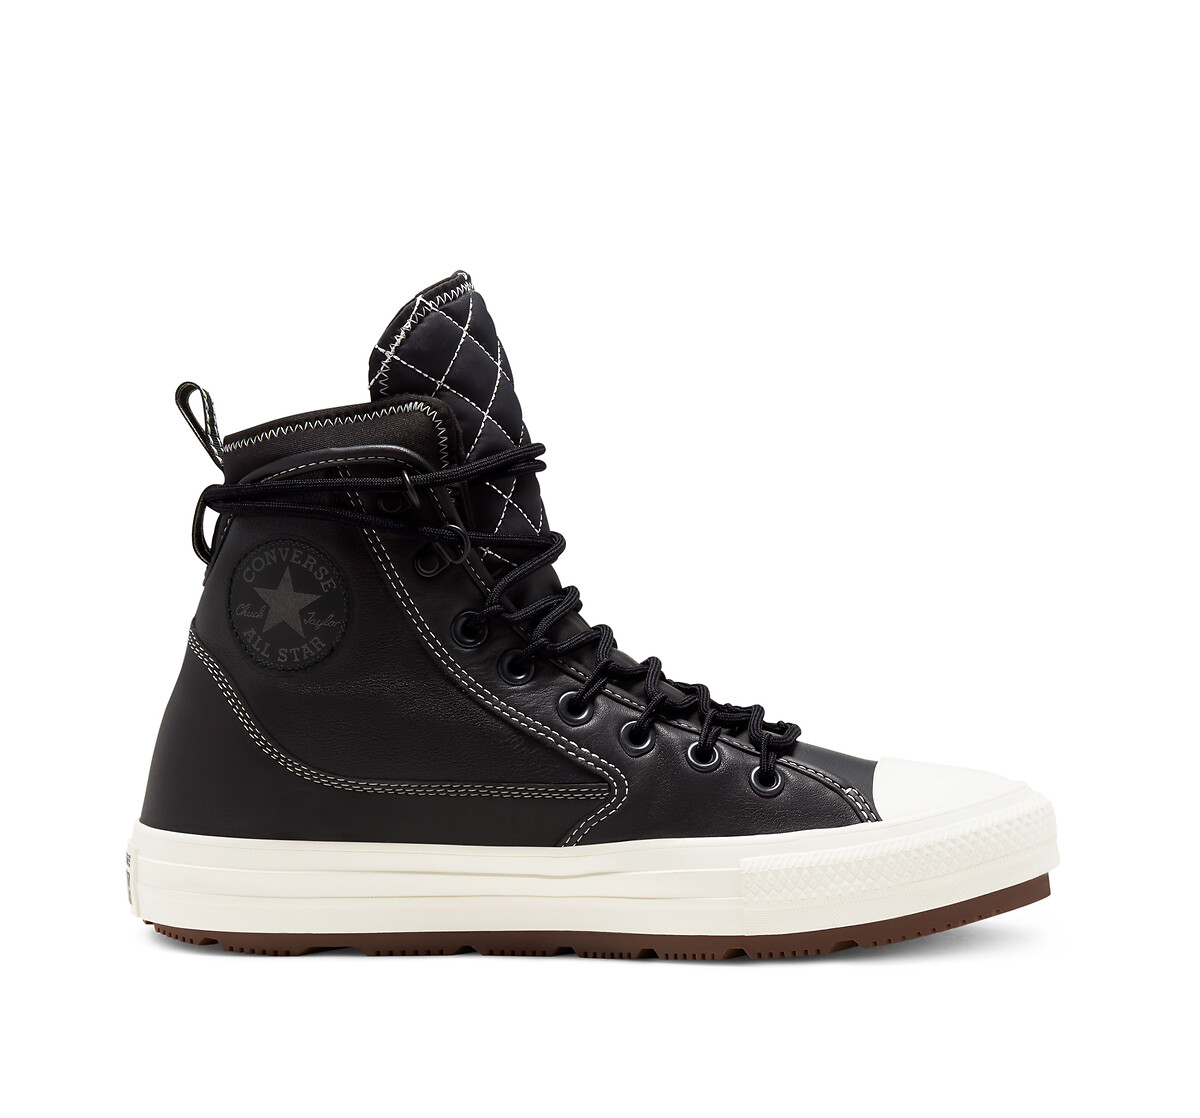 Image of All Star All Terrain Utility Leather High Top Trainers